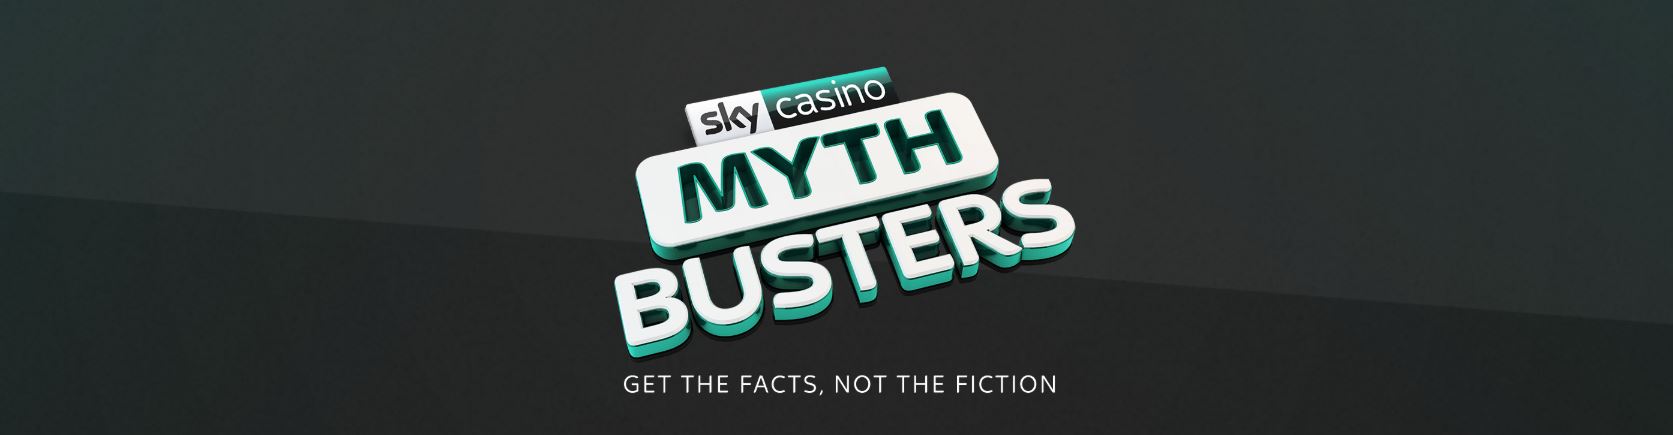 Skycasino has roulette and poker rooms on its website.